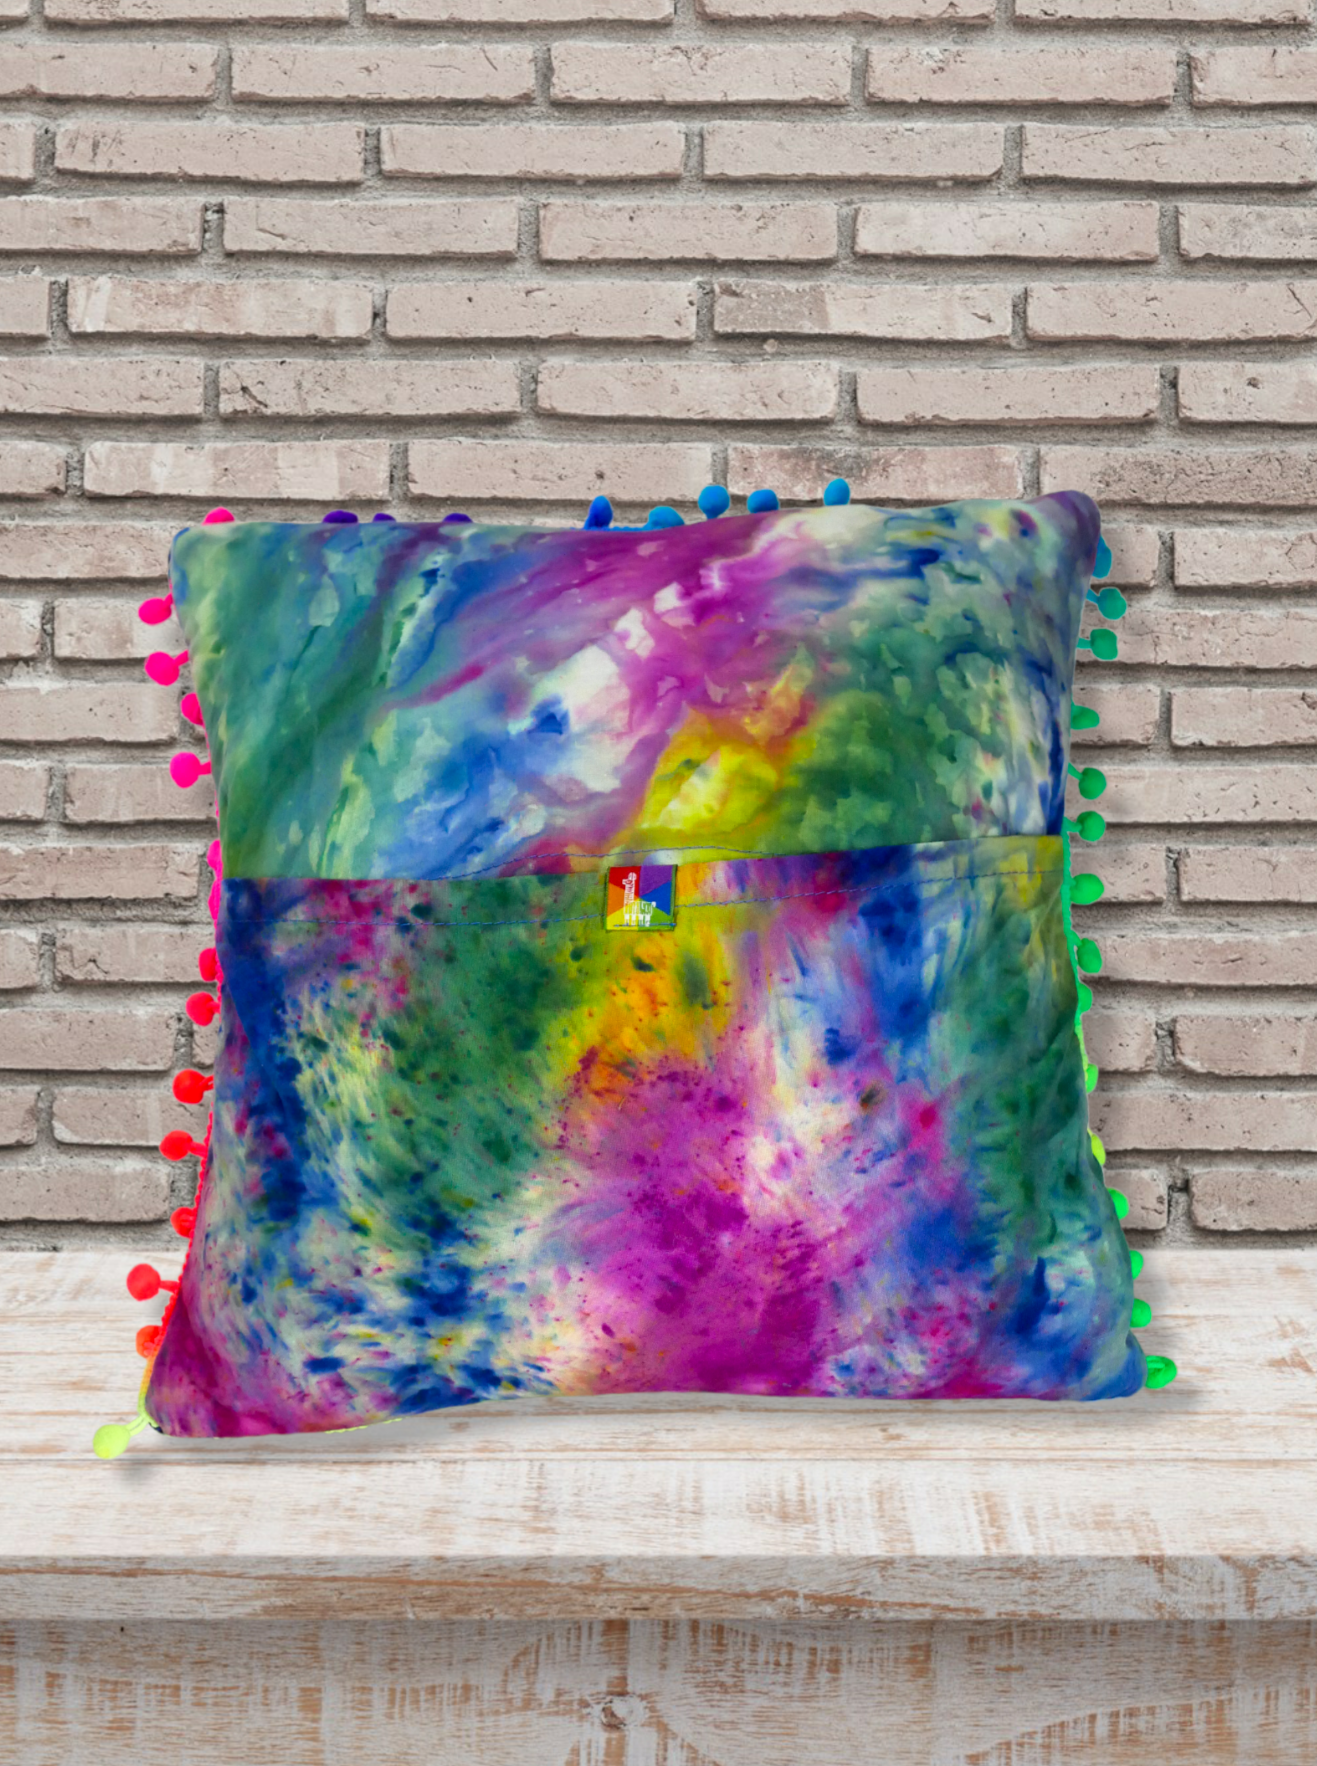 12"x12" Throw Pillow Cover